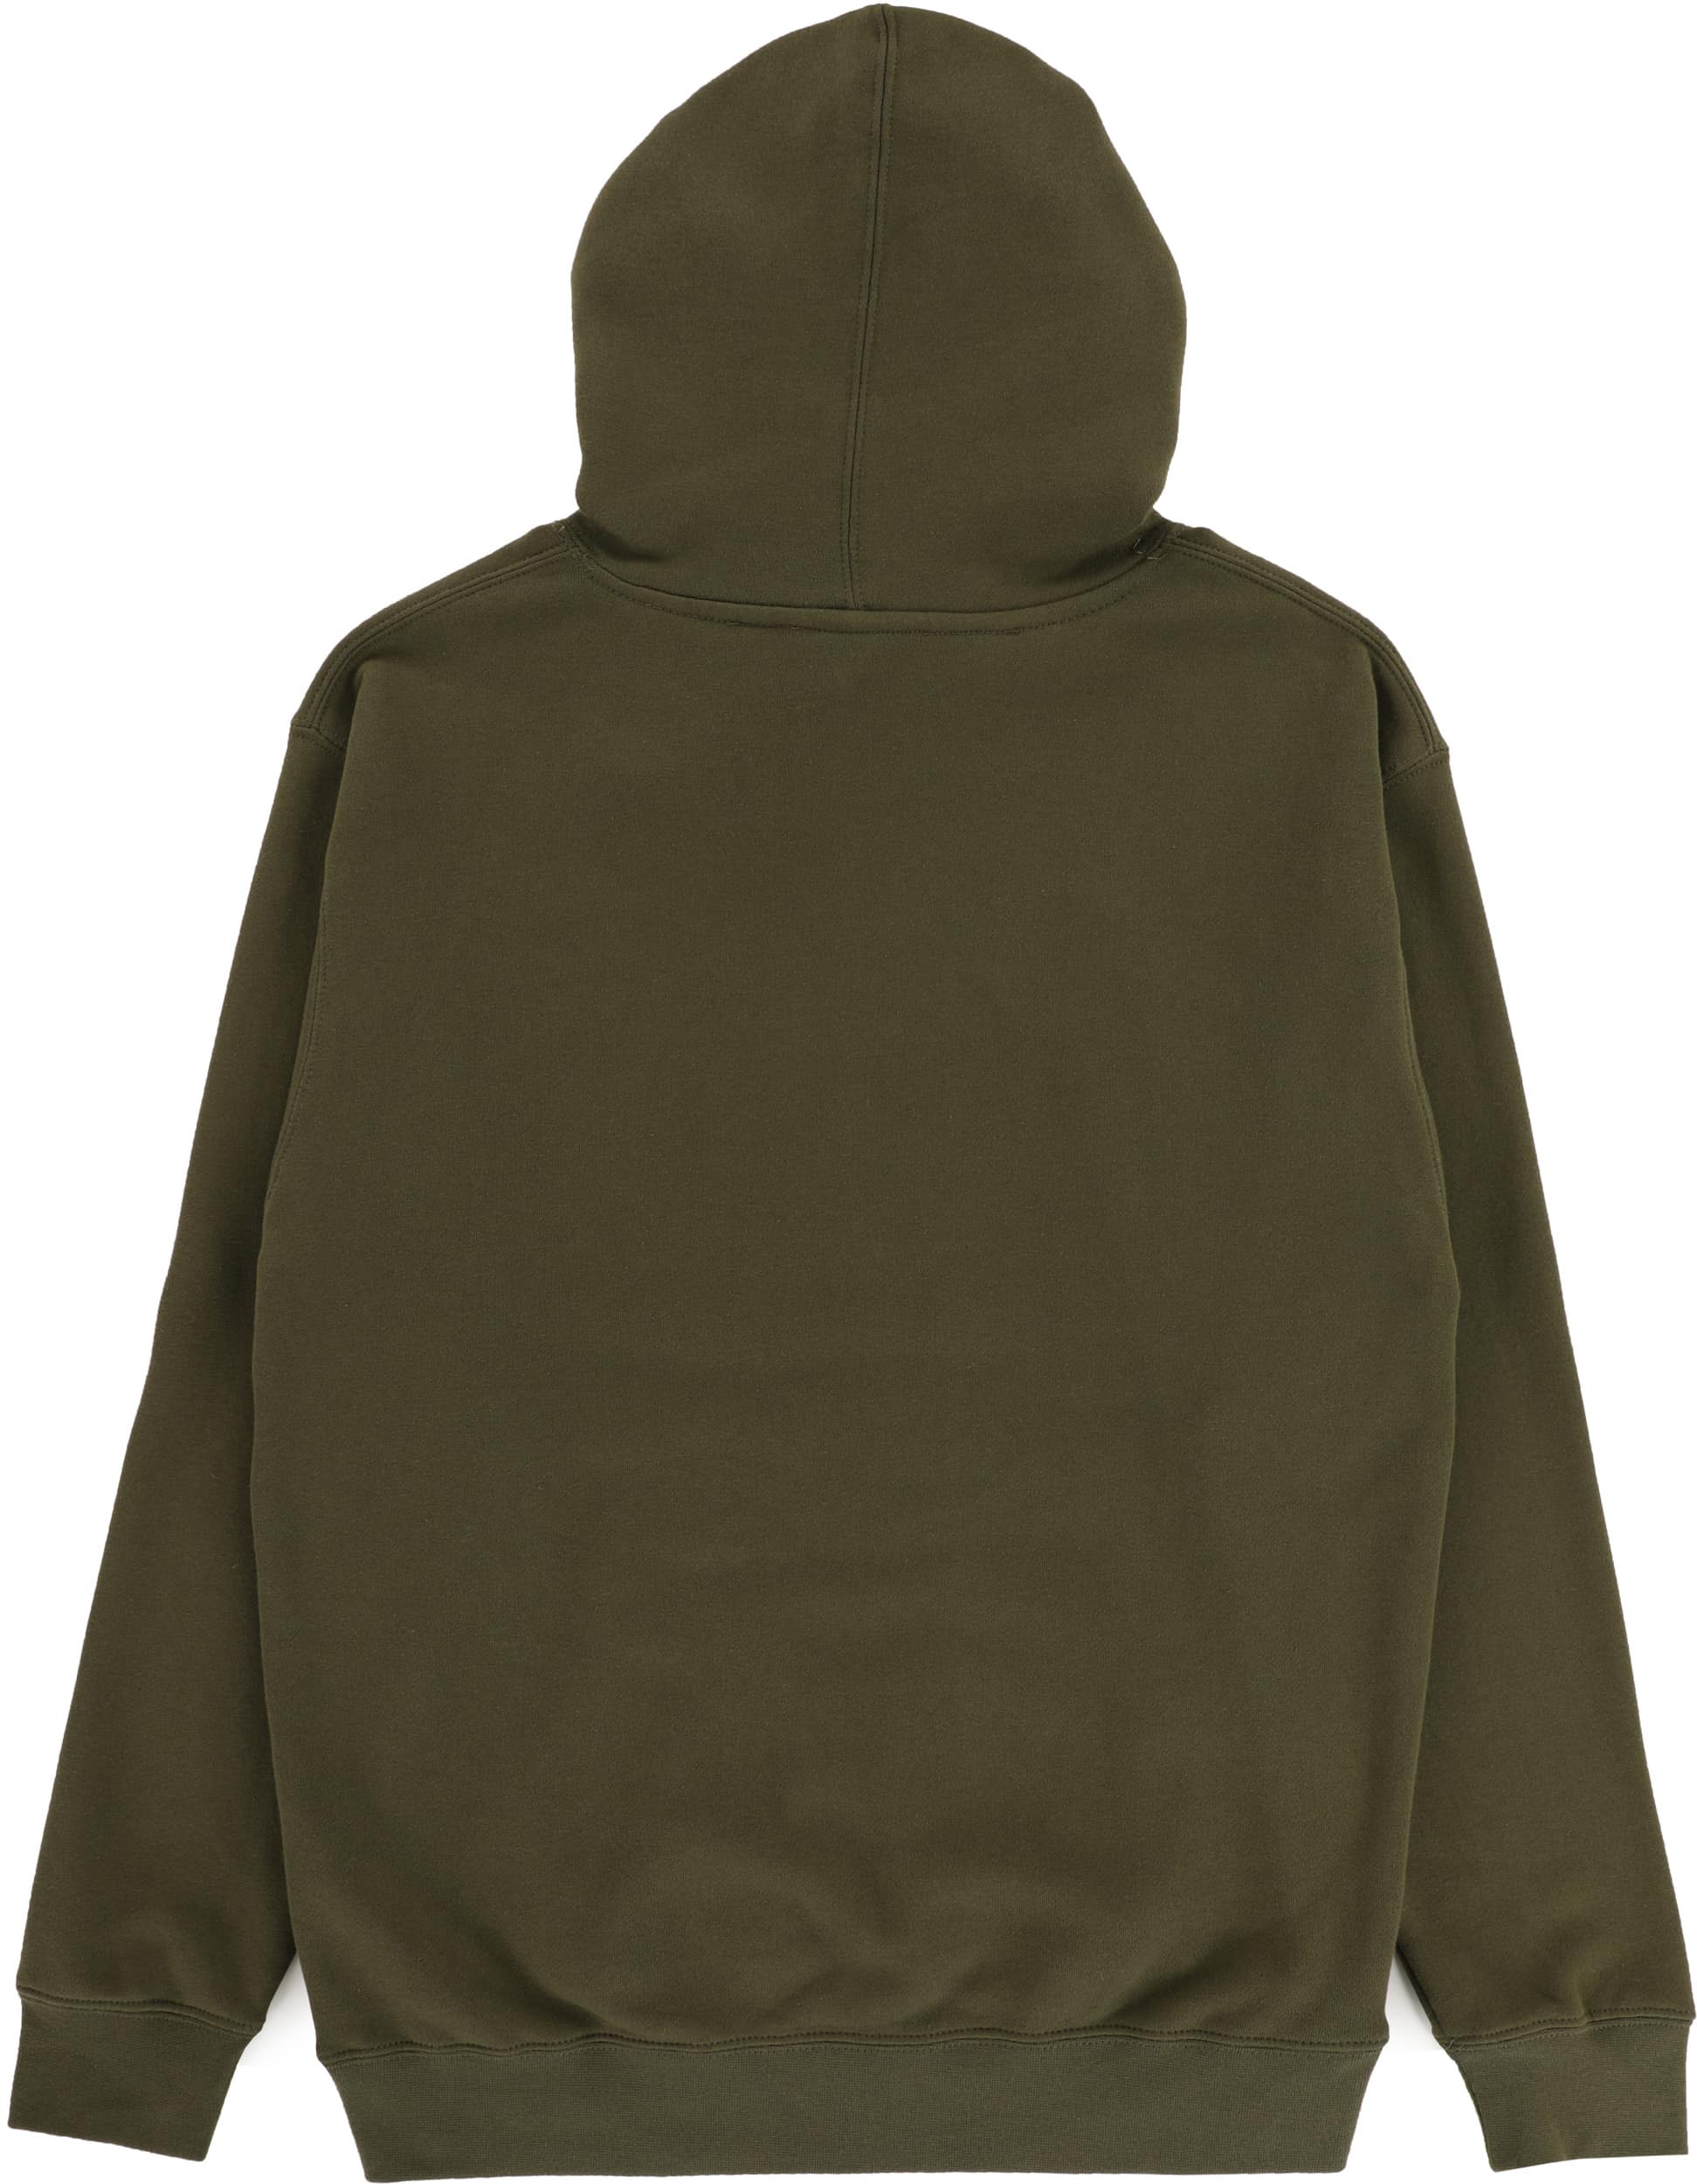 Thunder Worldwide Hoodie - army/red | Tactics